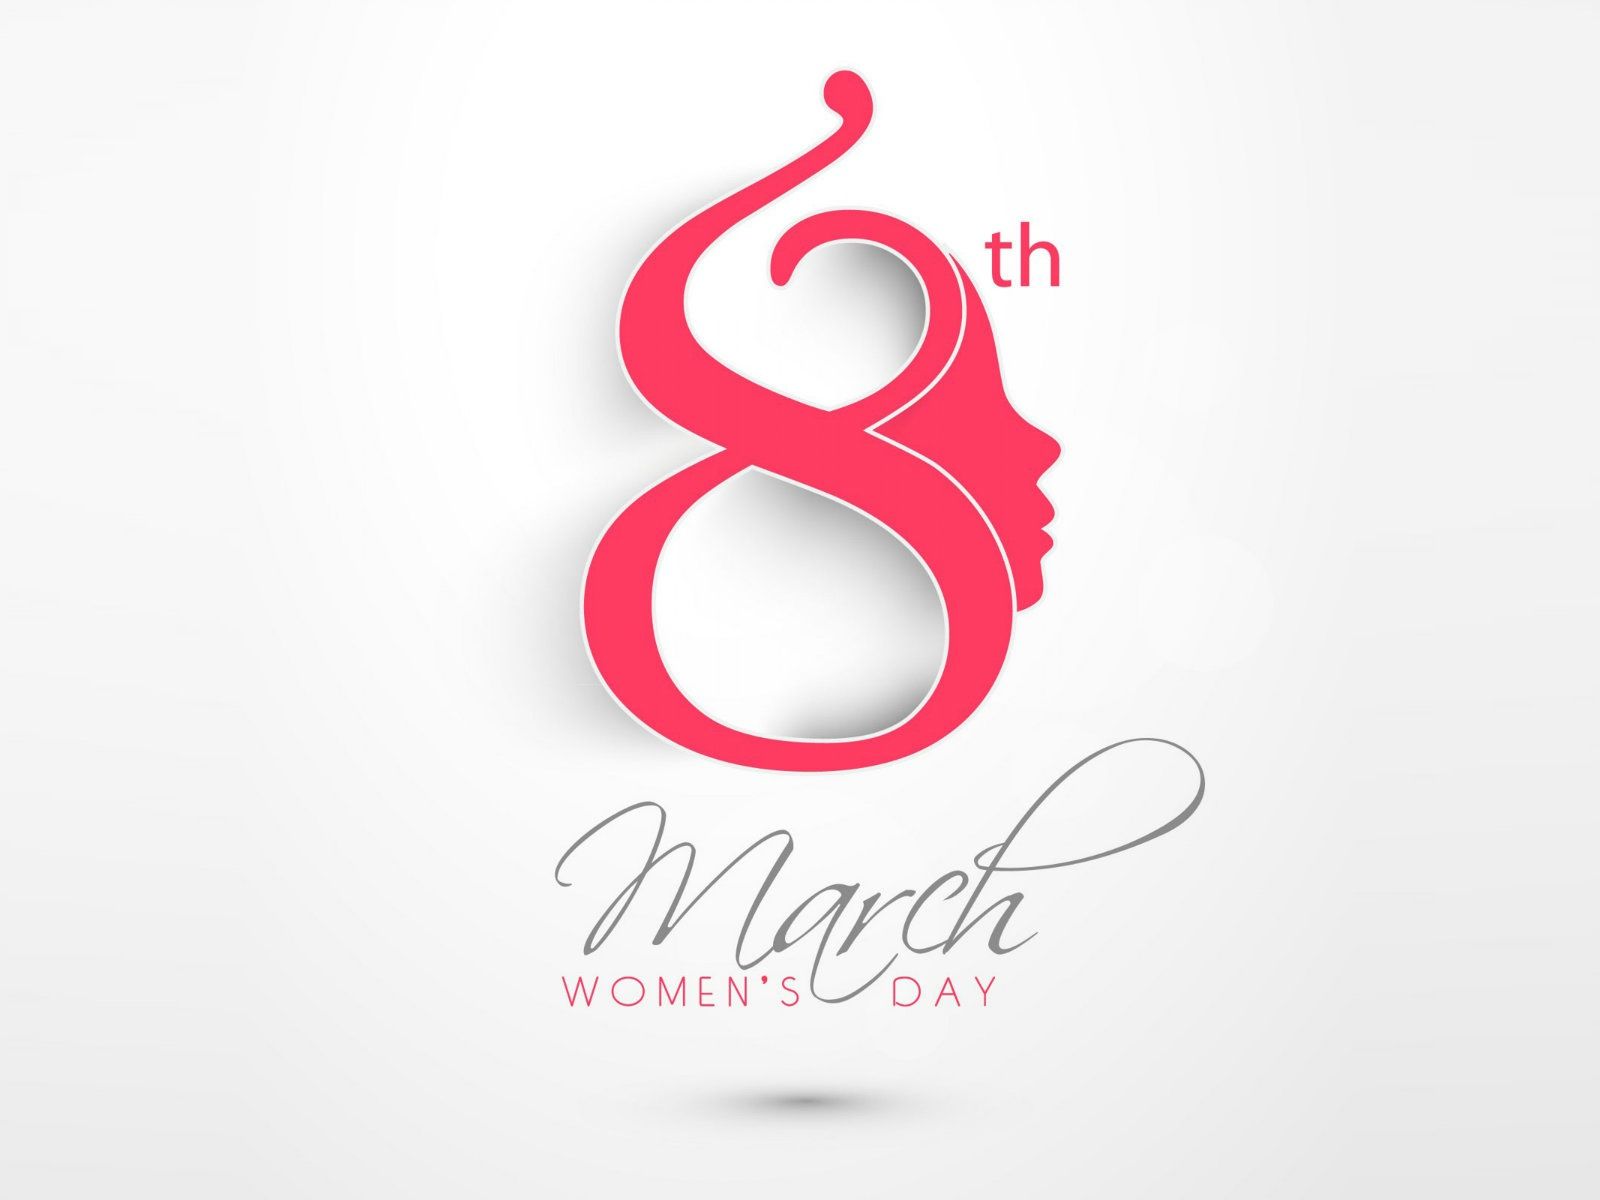 Desktop Wallpaper Women's Day, 8th March, Celebrations, HD Image, Picture, Background, D70m8n